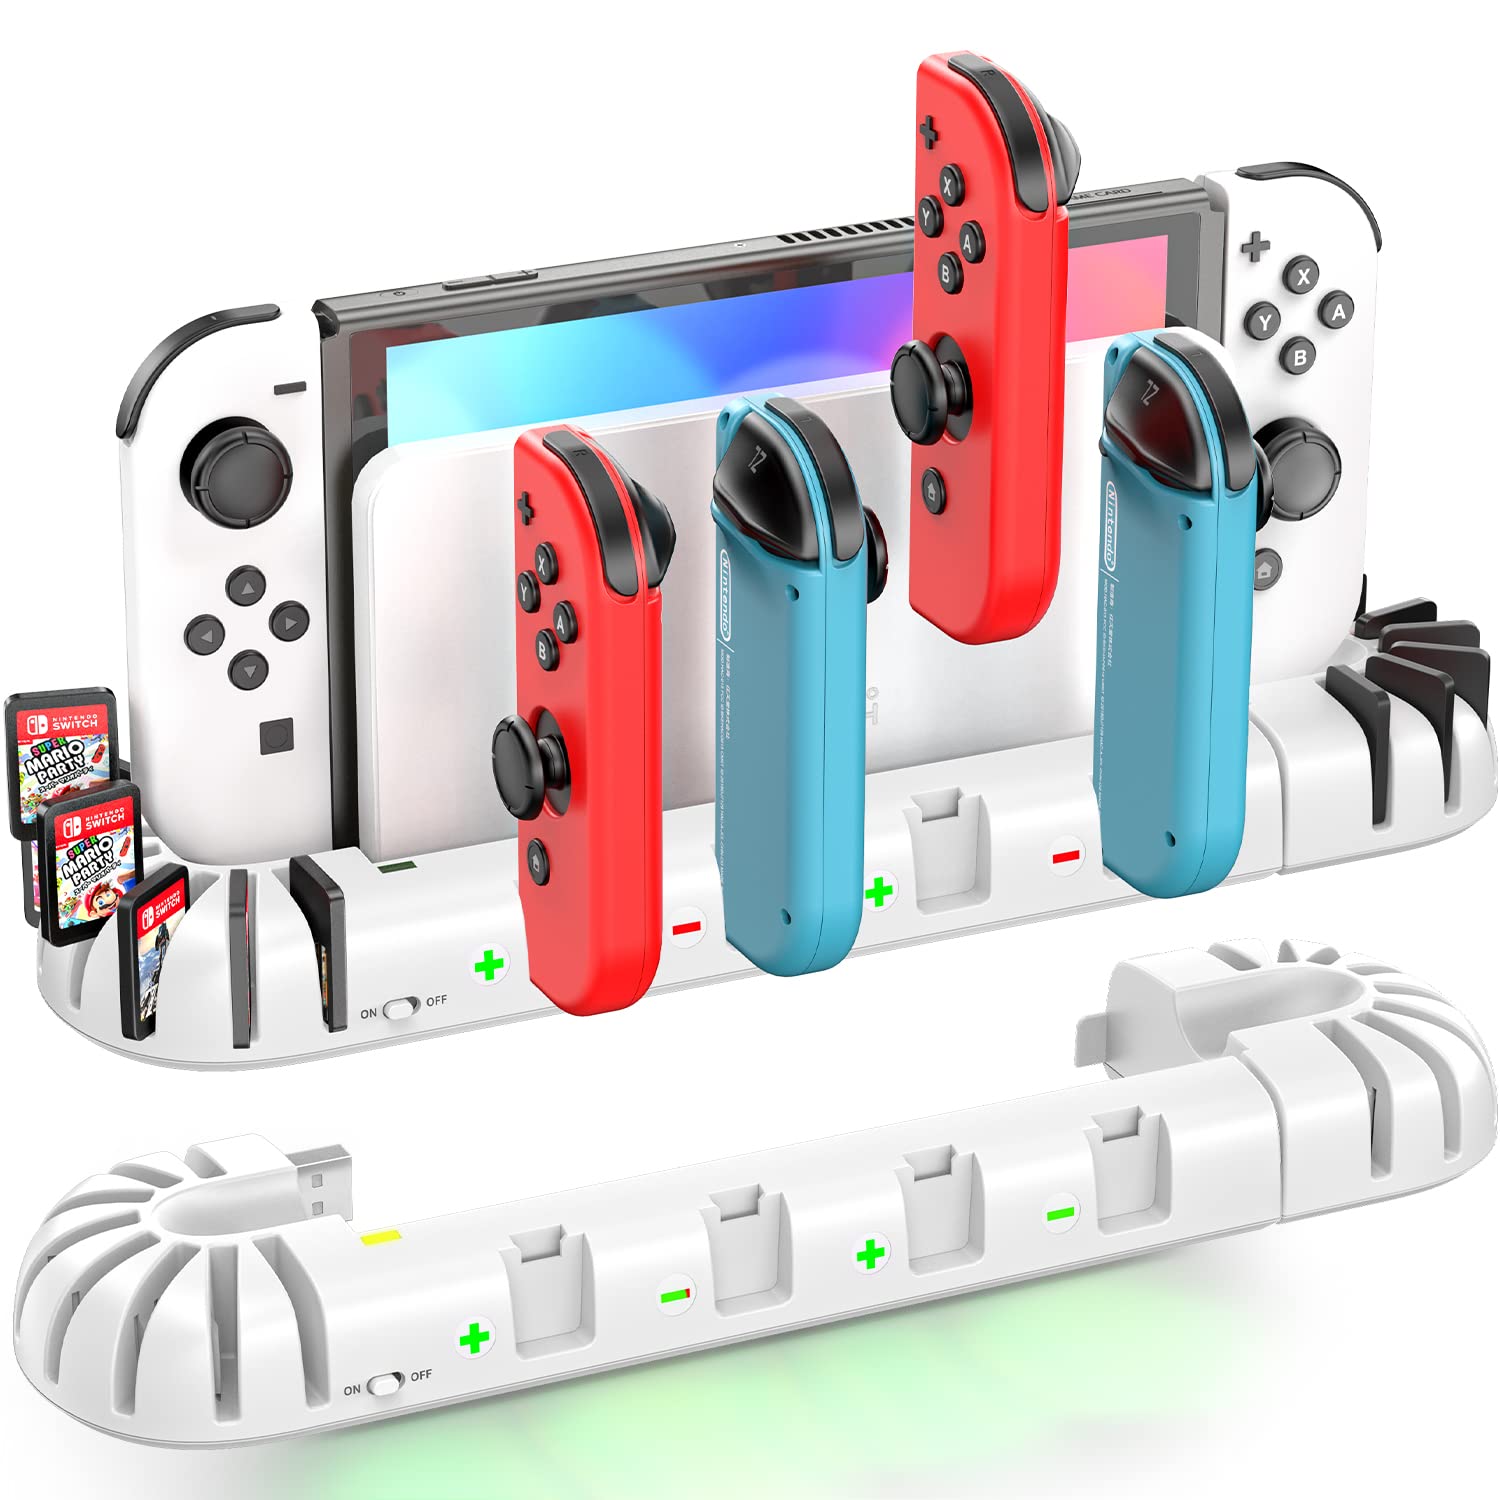 Switch Controller Charger Dock Station for Joycons, OIVO Upgraded 16 Game Slots Charging Dock Compatible with Nintendo Switch & OLED Model Joy-con, Charger for Nintendo Switch Joycon Controller-White